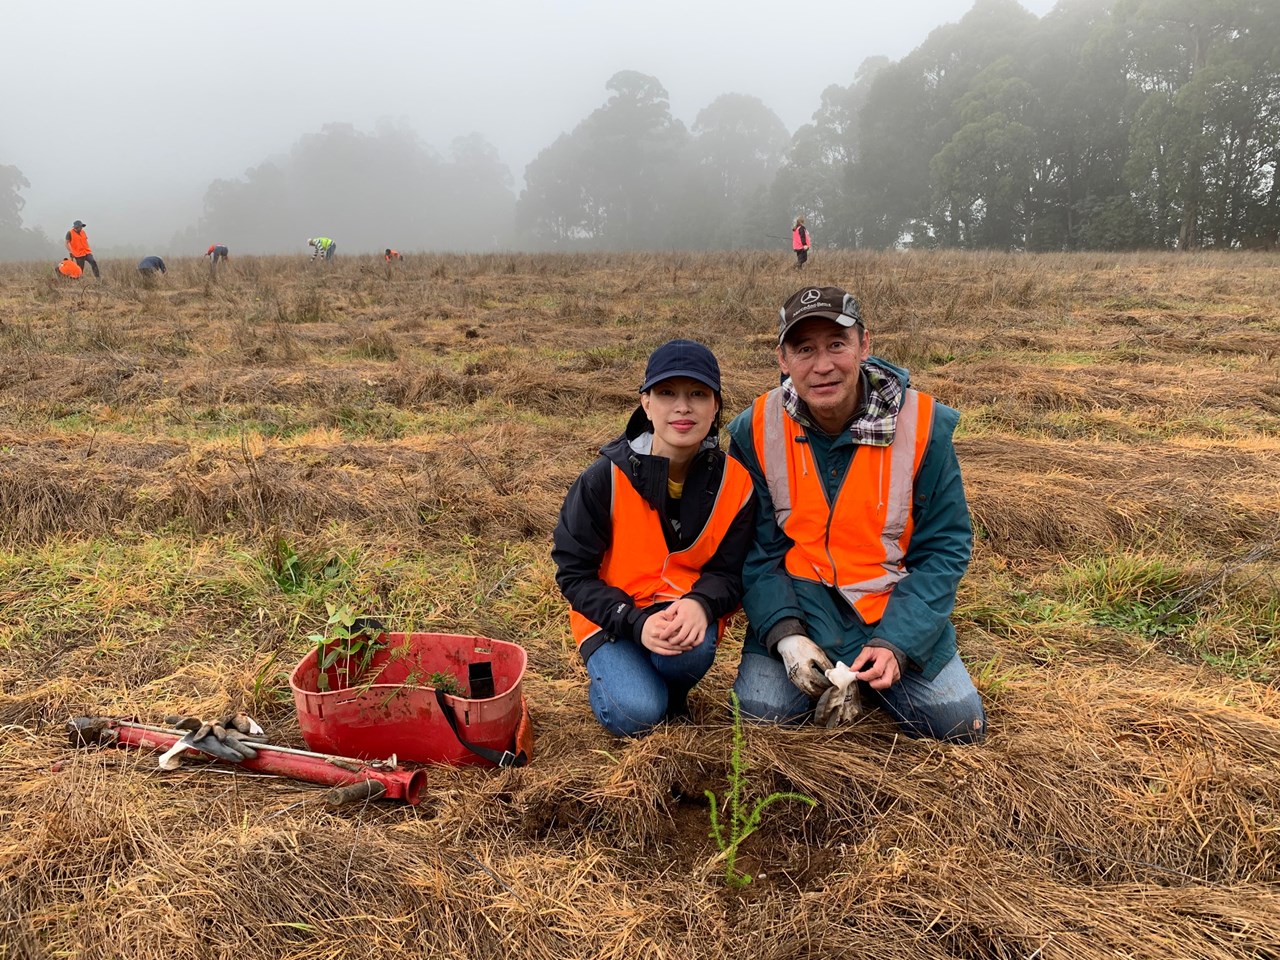 smartgroup two people partaking in the tree planting in a field